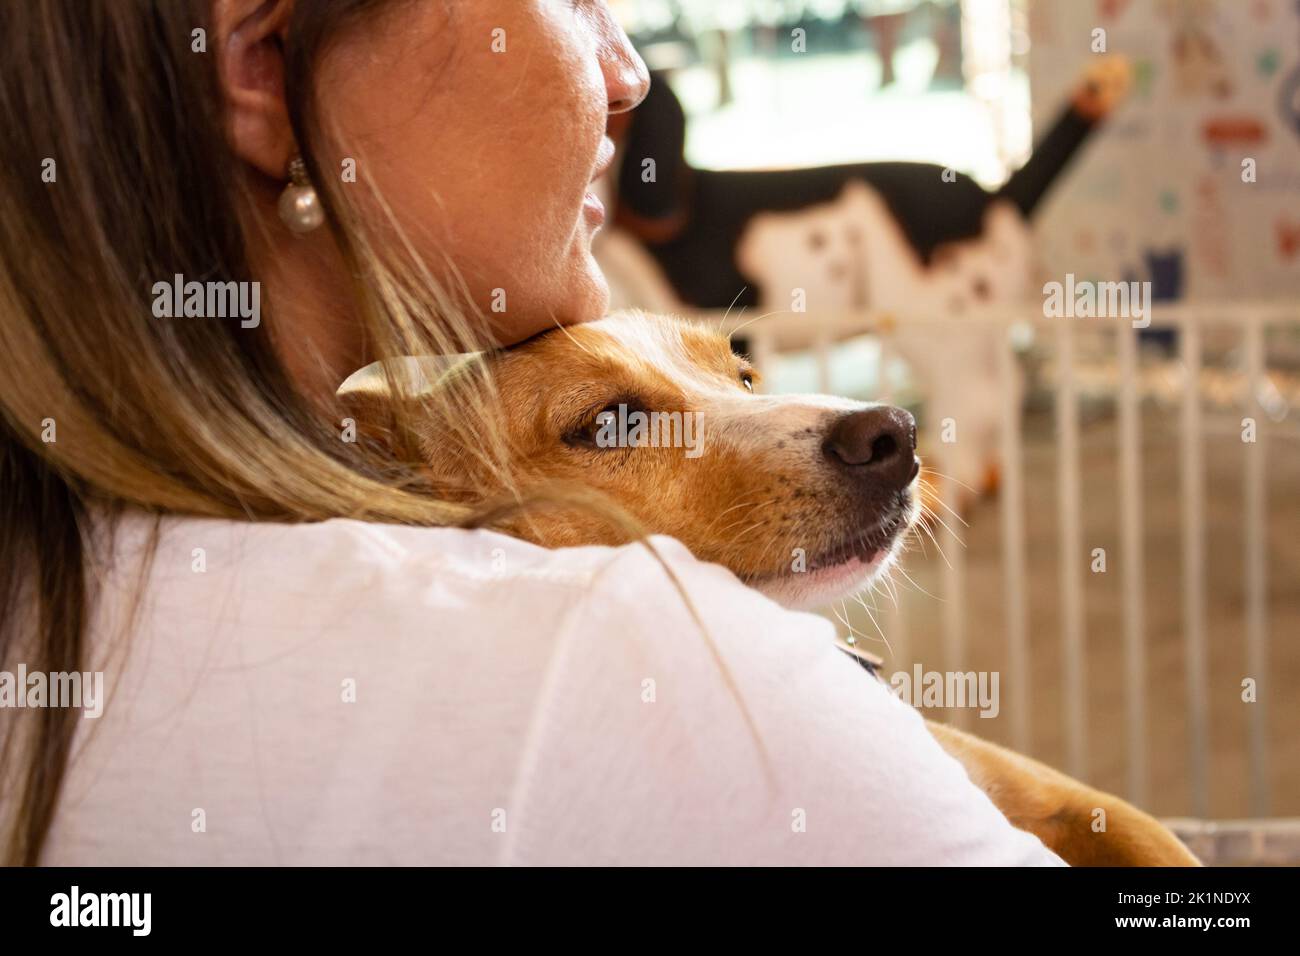 Goiânia, Goias, Brazil – September 17, 2022: Detail of a girl from the back, holding a dog in her arms at an adoption fair. Stock Photo